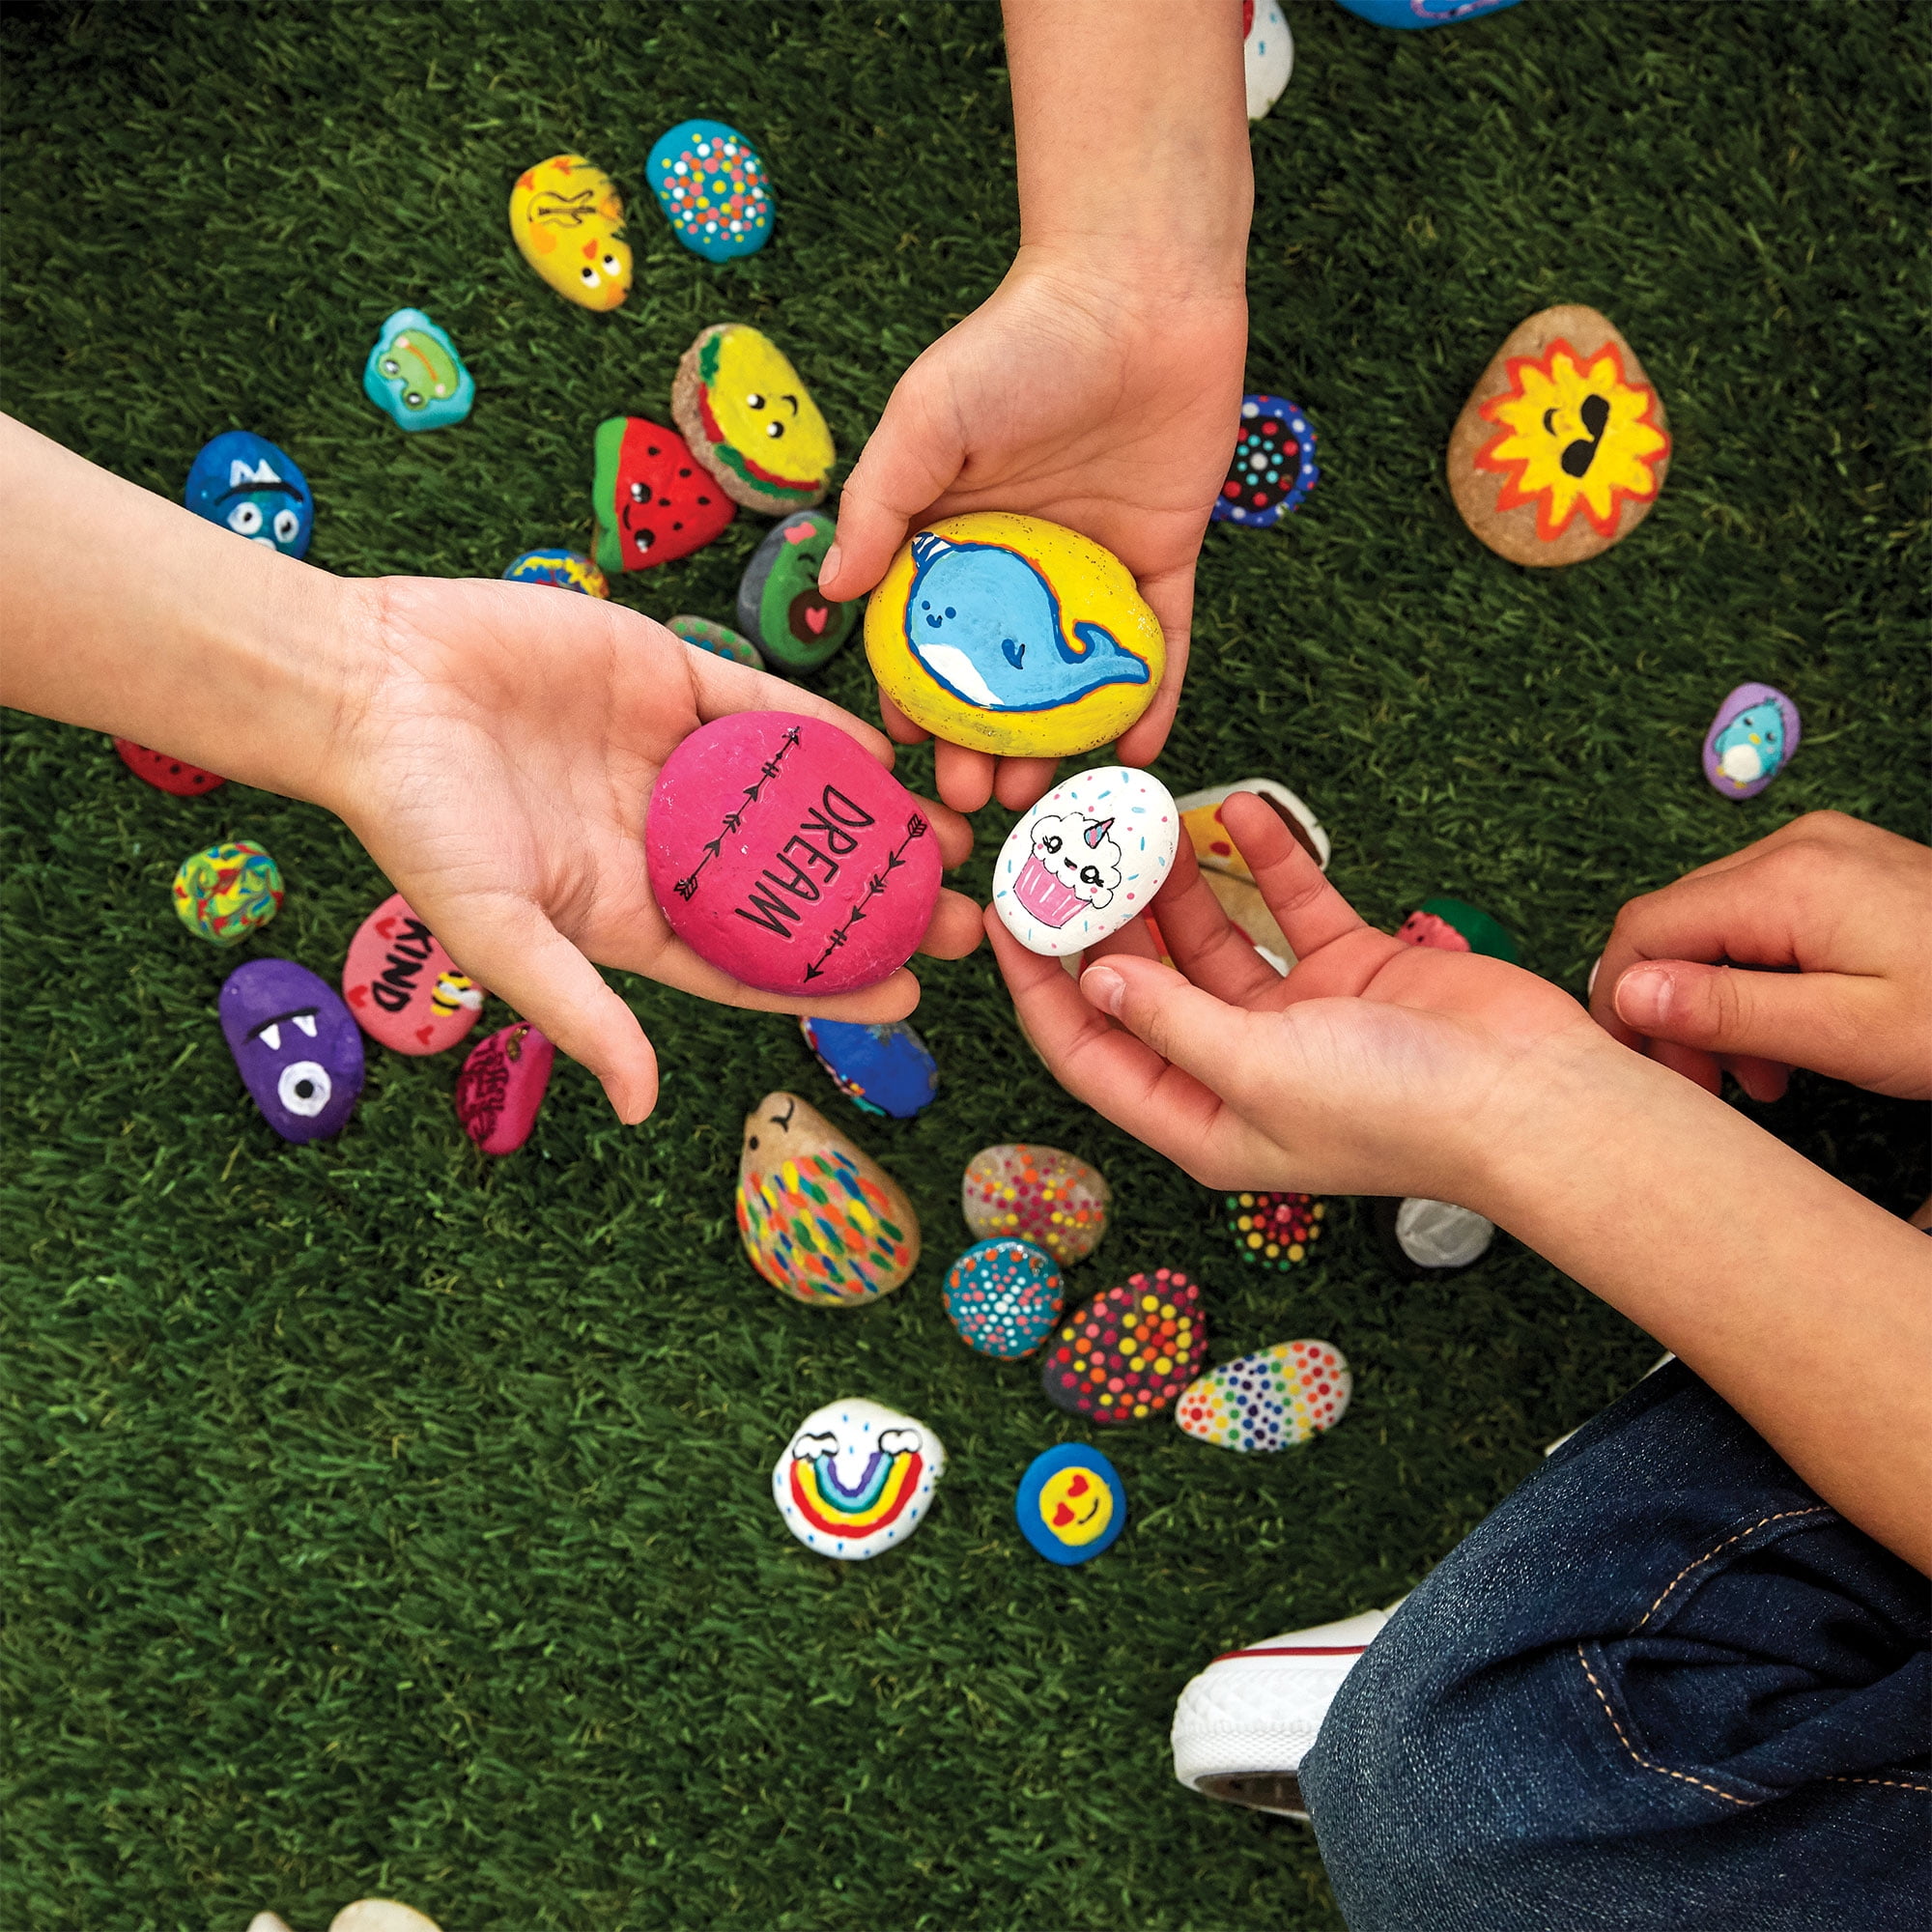 Love Rocks Cactus Kit, Rock Painting, DIY Craft, Craft Kit for Kids -  Create Art, Party IN A BOX